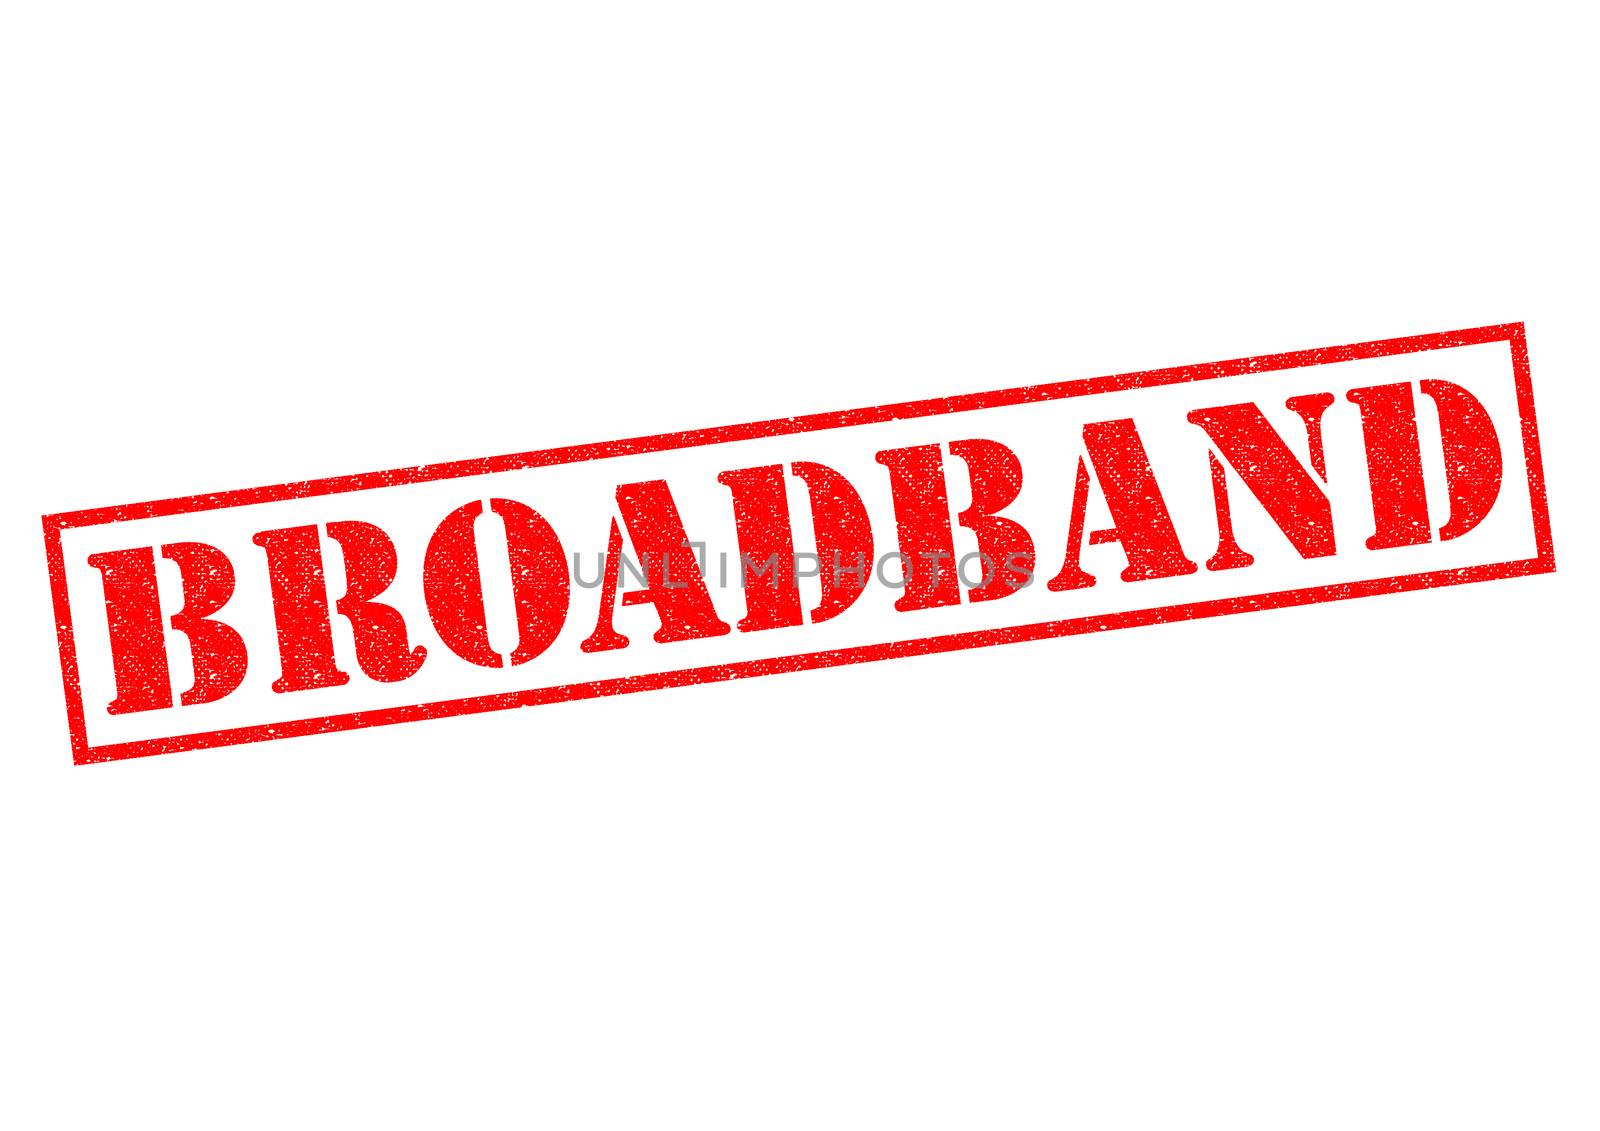 BROADBAND red Rubber Stamp over a white background.